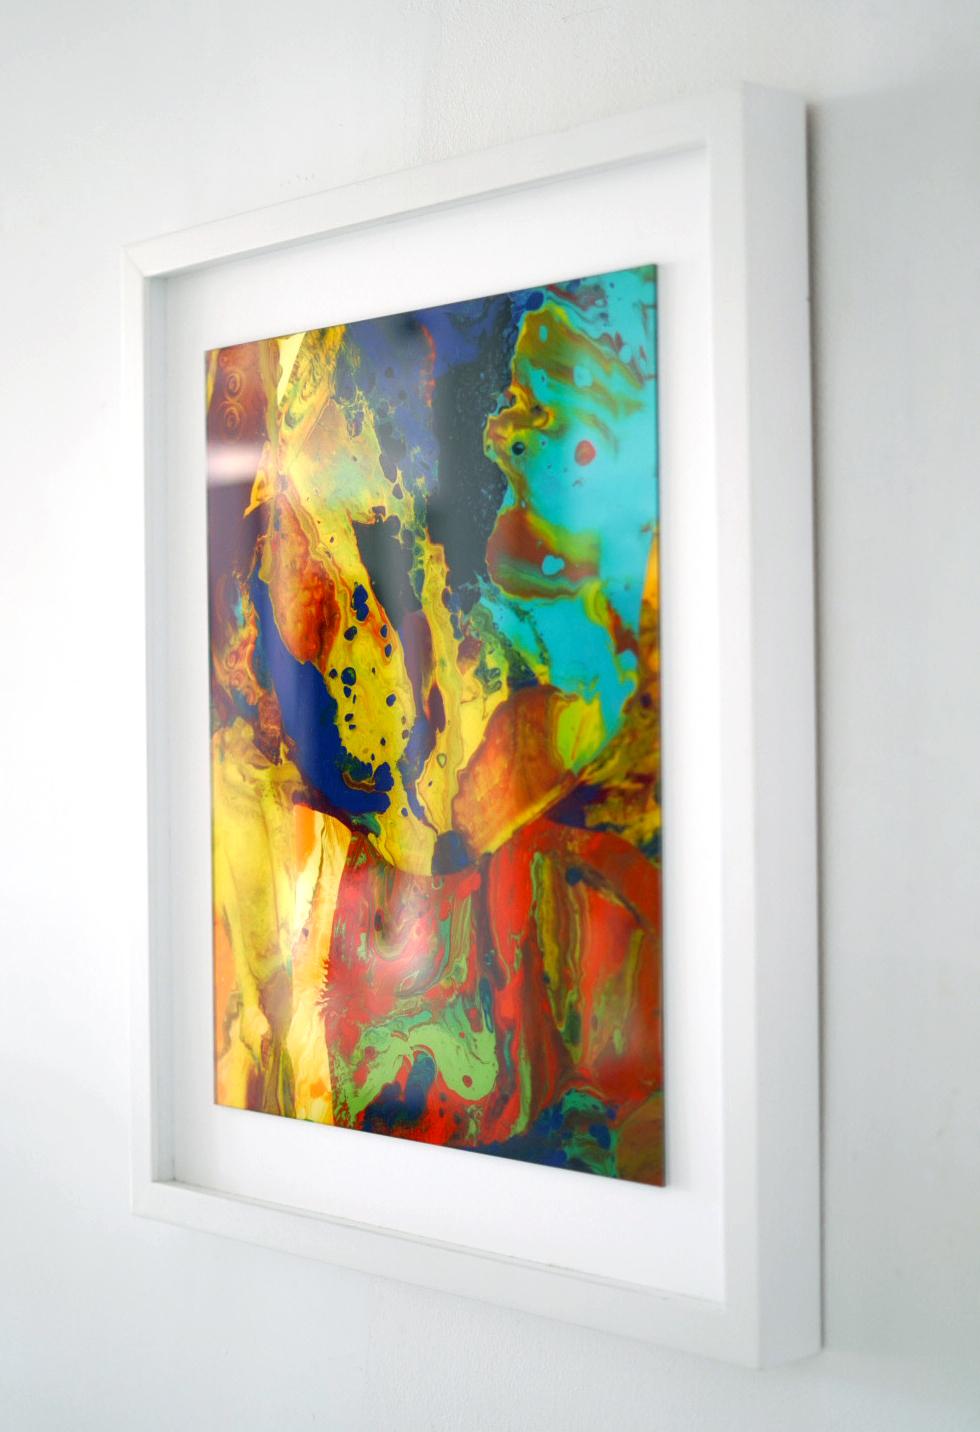 Bagdad [9] - Abstract Expressionist Print by Gerhard Richter